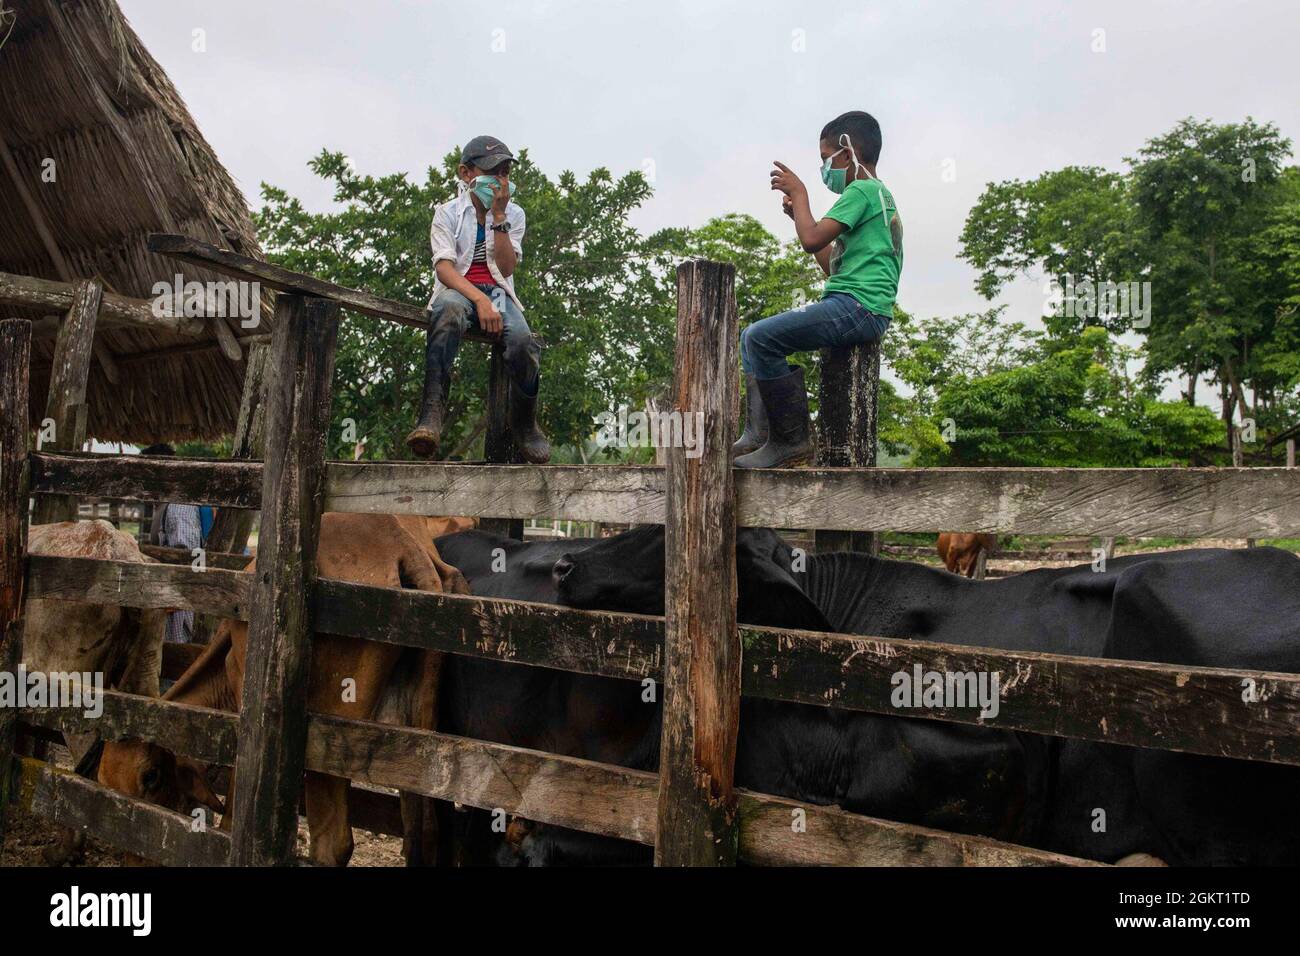 Two young boys talk to each other as the veterinary team prepares to vaccinate cattle in Melchor De Mencos, Guatemala, June 24, 2021. The veterinary team from the 109th Medical Detachment Veterinary Services out of Garden Grove, California, will provide animal care education as well as vaccines for cattle during Resolute Sentinel 21. Stock Photo